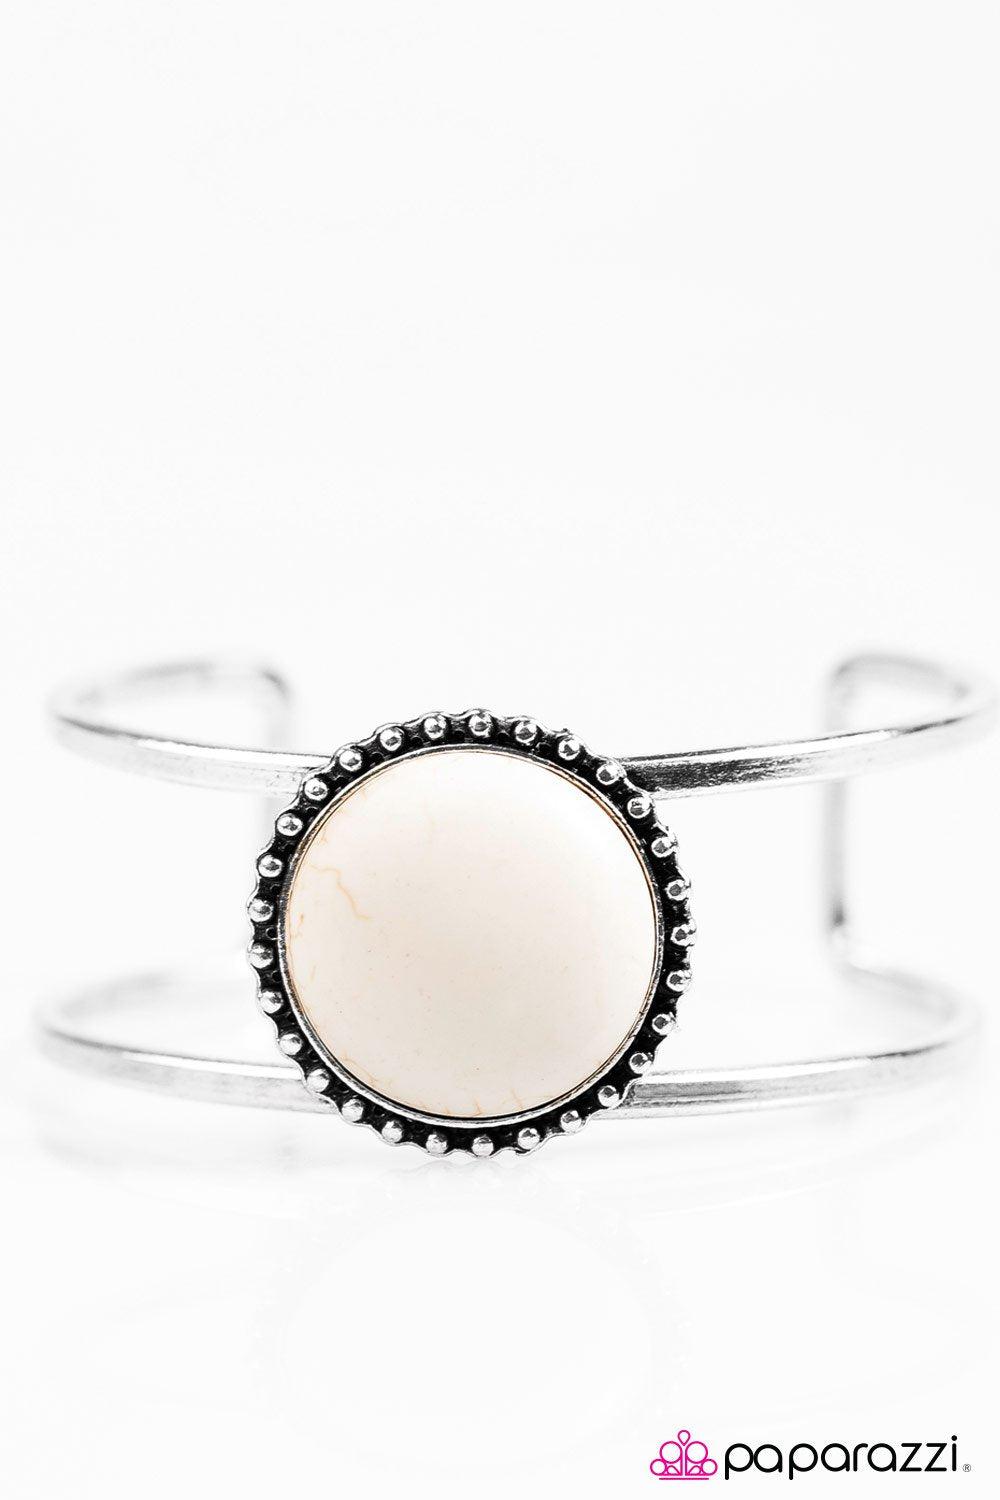 New Horizons White Stone and Silver Cuff Bracelet - Paparazzi Accessories-CarasShop.com - $5 Jewelry by Cara Jewels